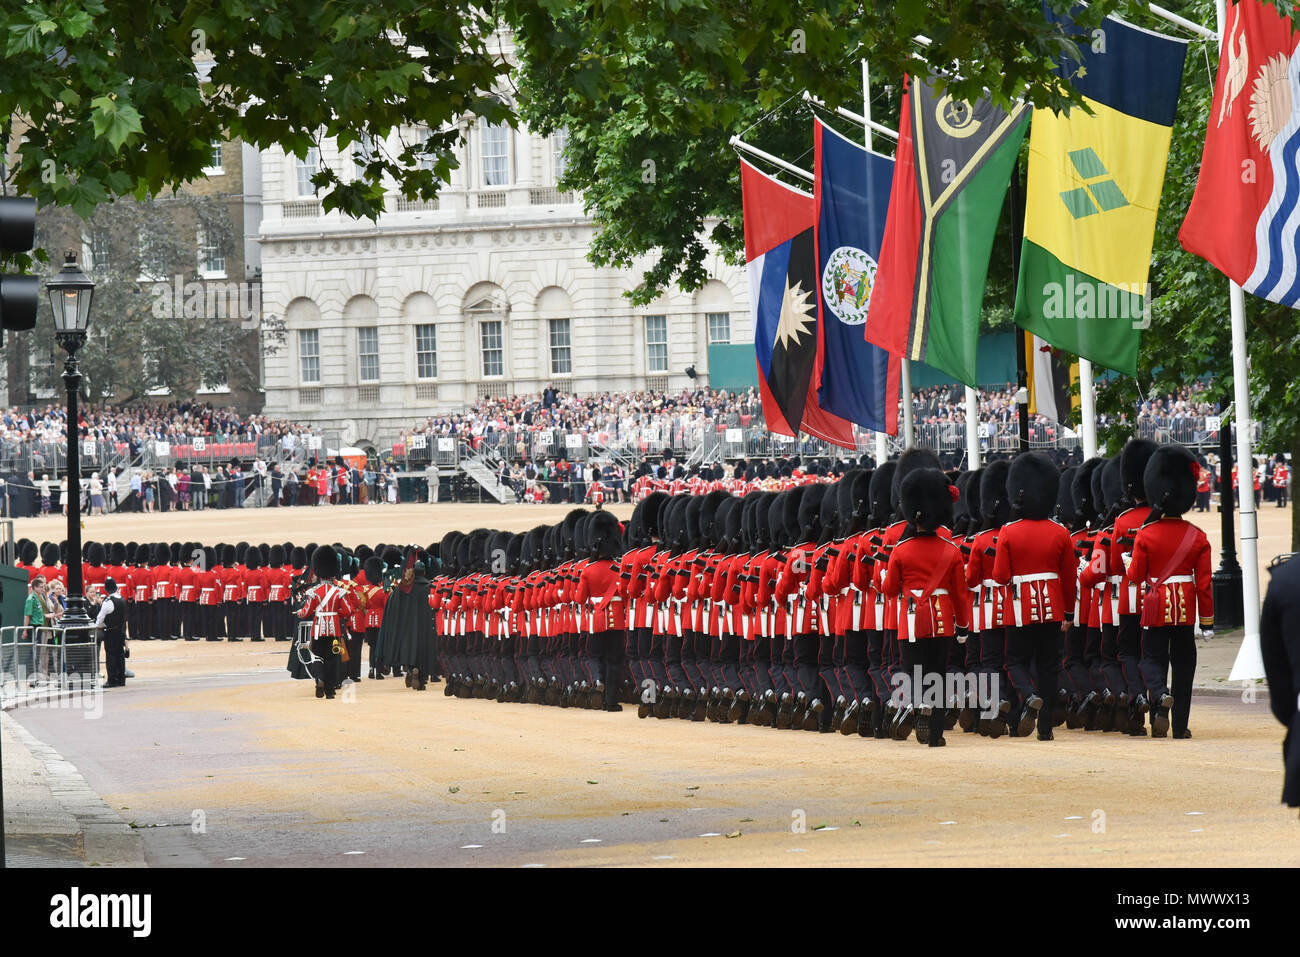 The Mall, London, UK. 2nd June 2018.  Soldiers of the Household Division at the rehearsal for the Trooping the Colour, (the Queen's Birthday), the Colonel's Review march towards Horse Guards. Credit: Matthew Chattle/Alamy Live News Credit: Matthew Chattle/Alamy Live News Stock Photo